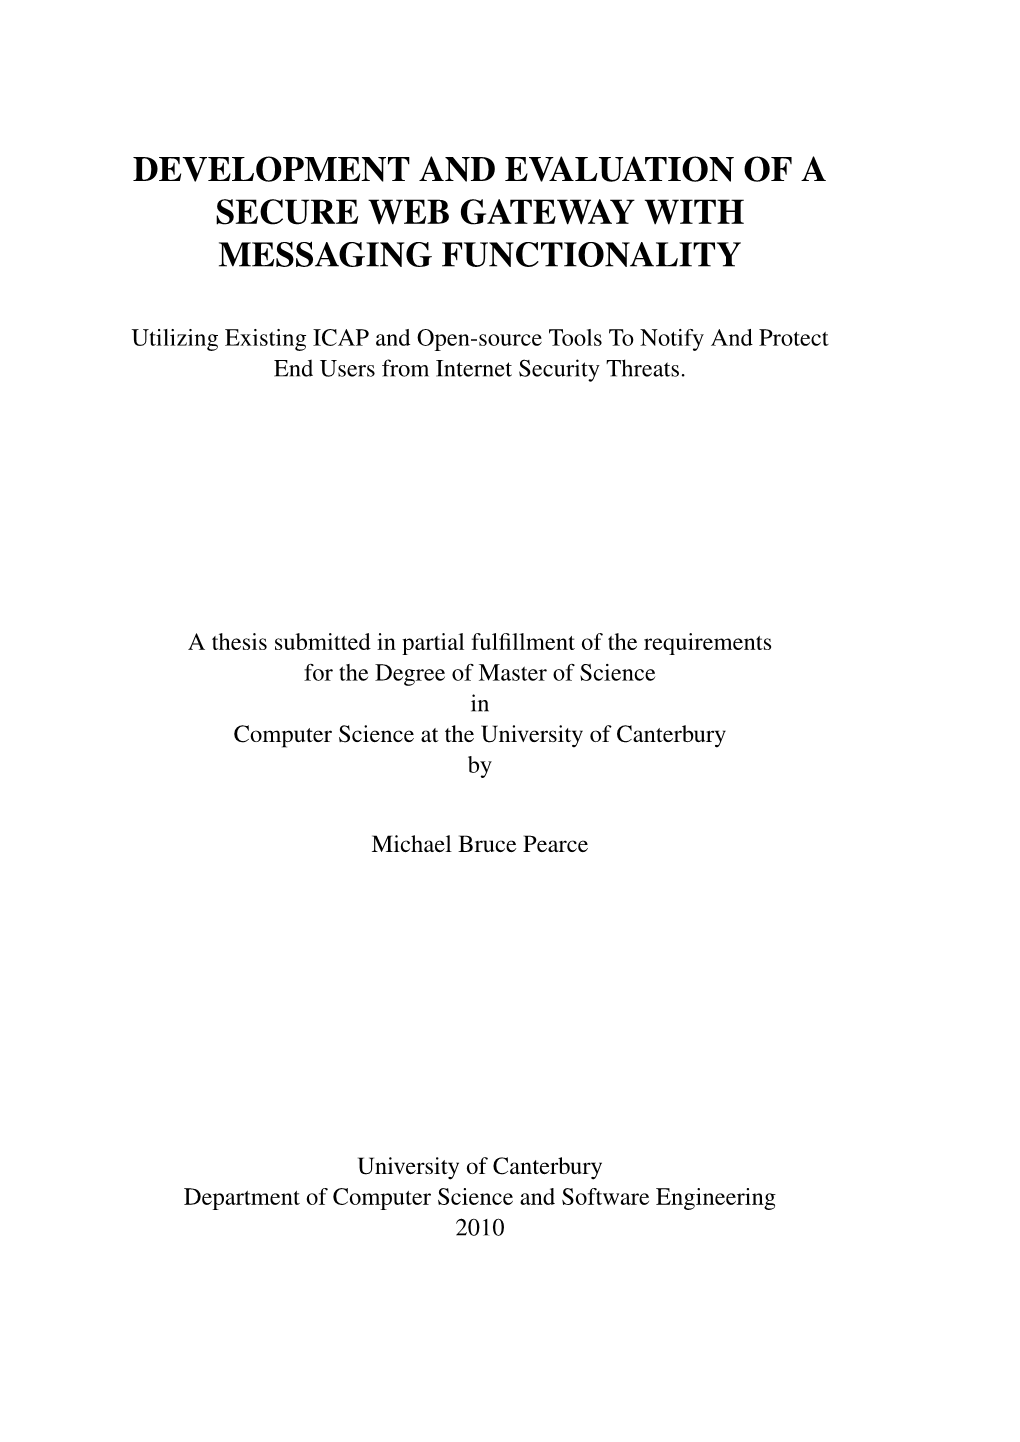 Development and Evaluation of a Secure Web Gateway with Messaging Functionality